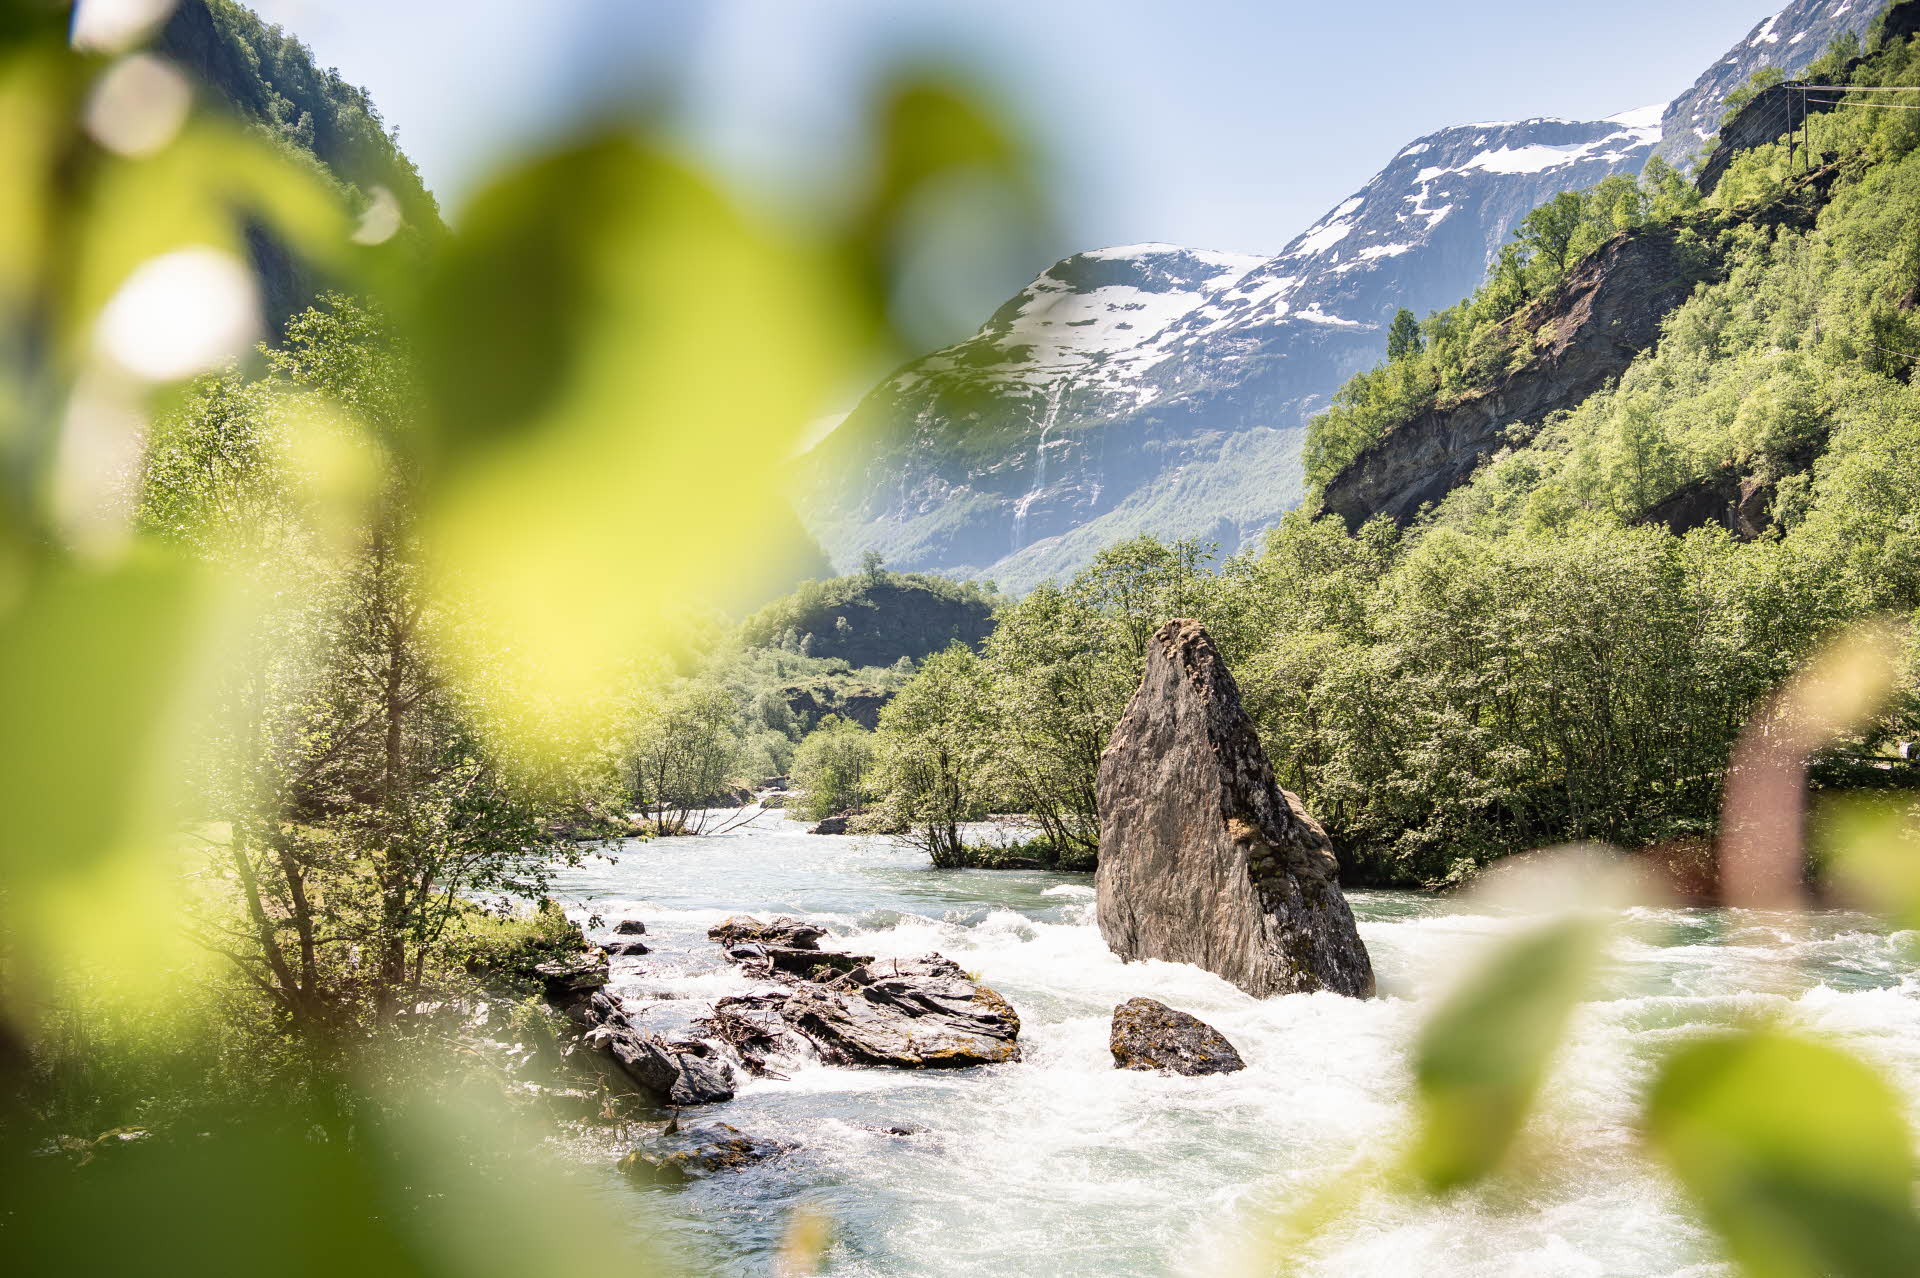 Huge pointed rock in the middle of raging Flam river in lush summer landscape with tall snow capped mountains in background